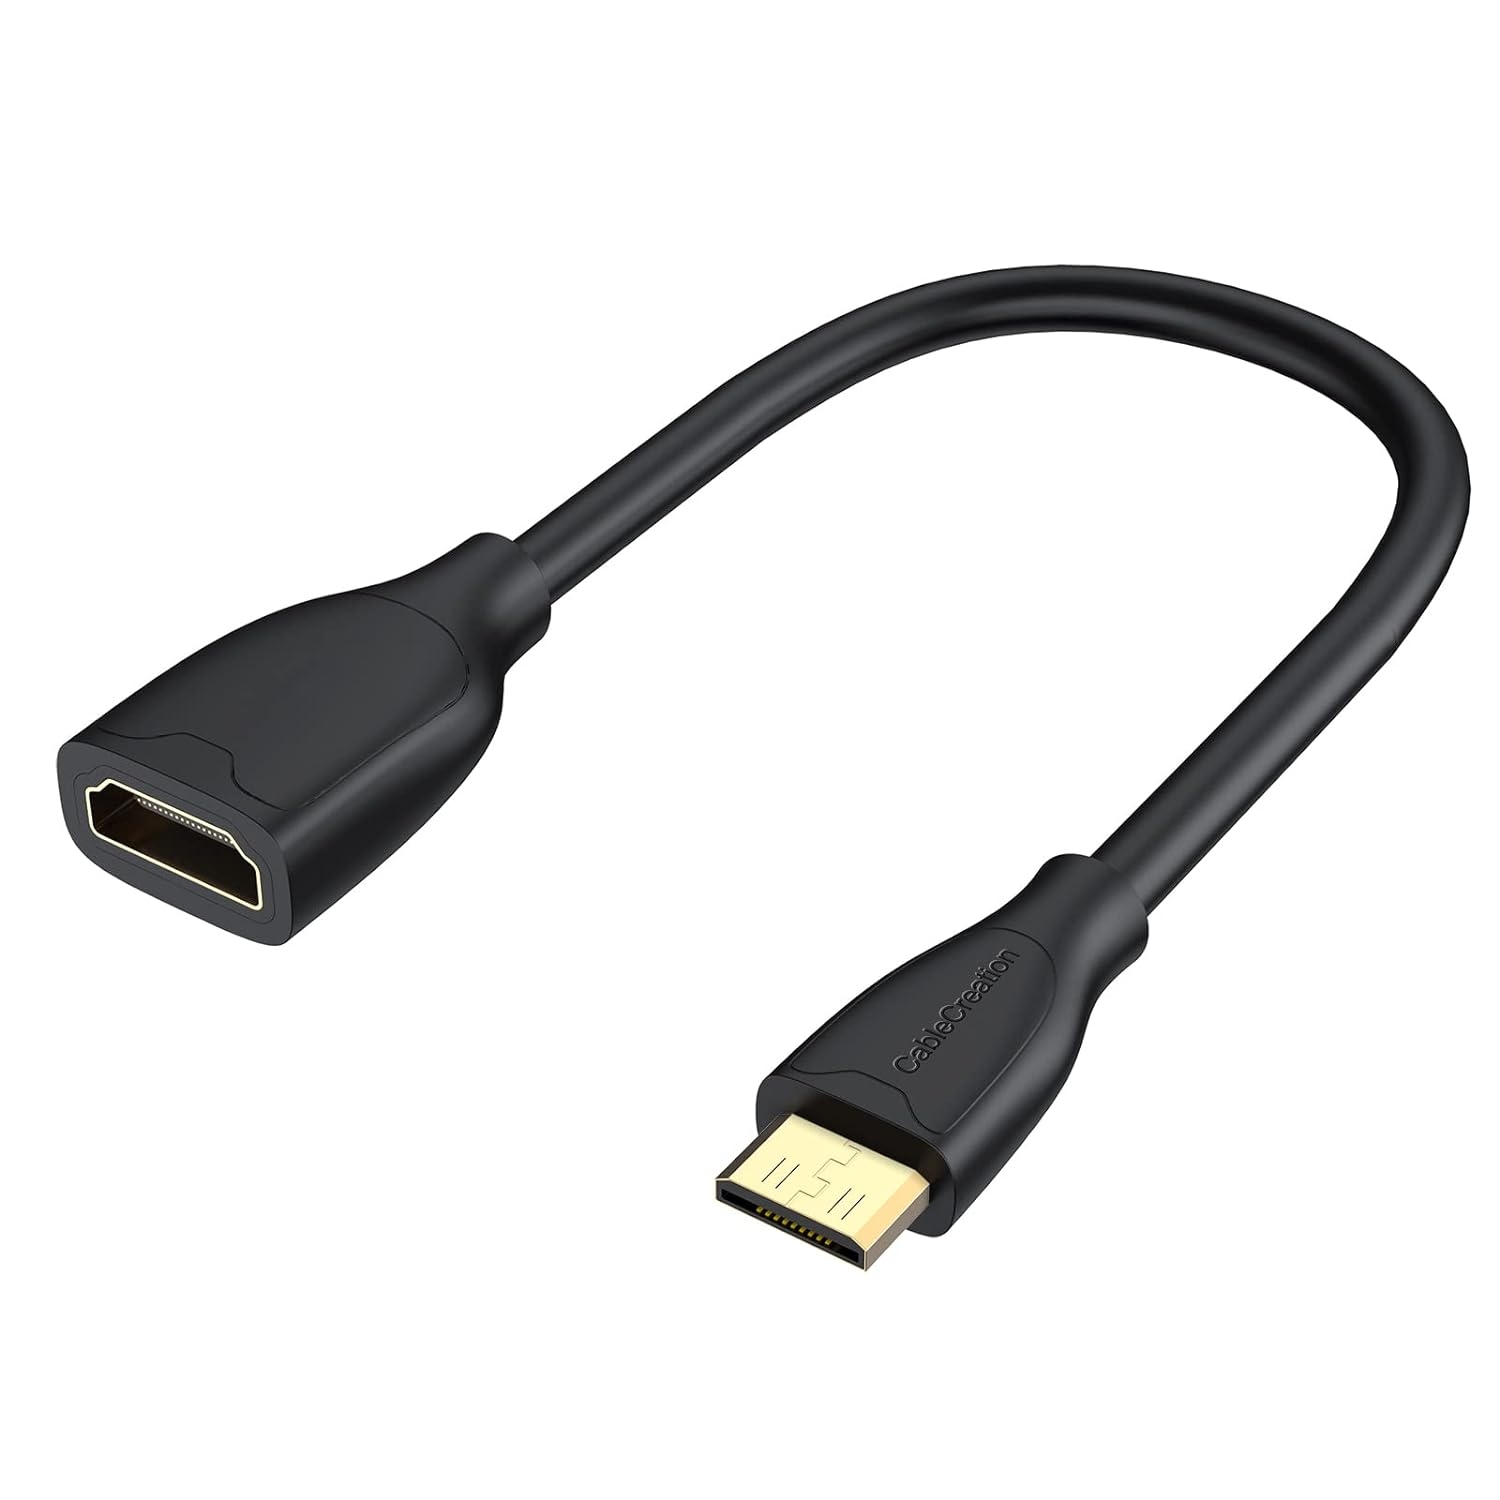 CableCreation 0.5ft Mini HDMI Male to Female Adapter 4K 60Hz for Camera, Camcorder, Graphics Card, Laptop, Tablet, HDTV